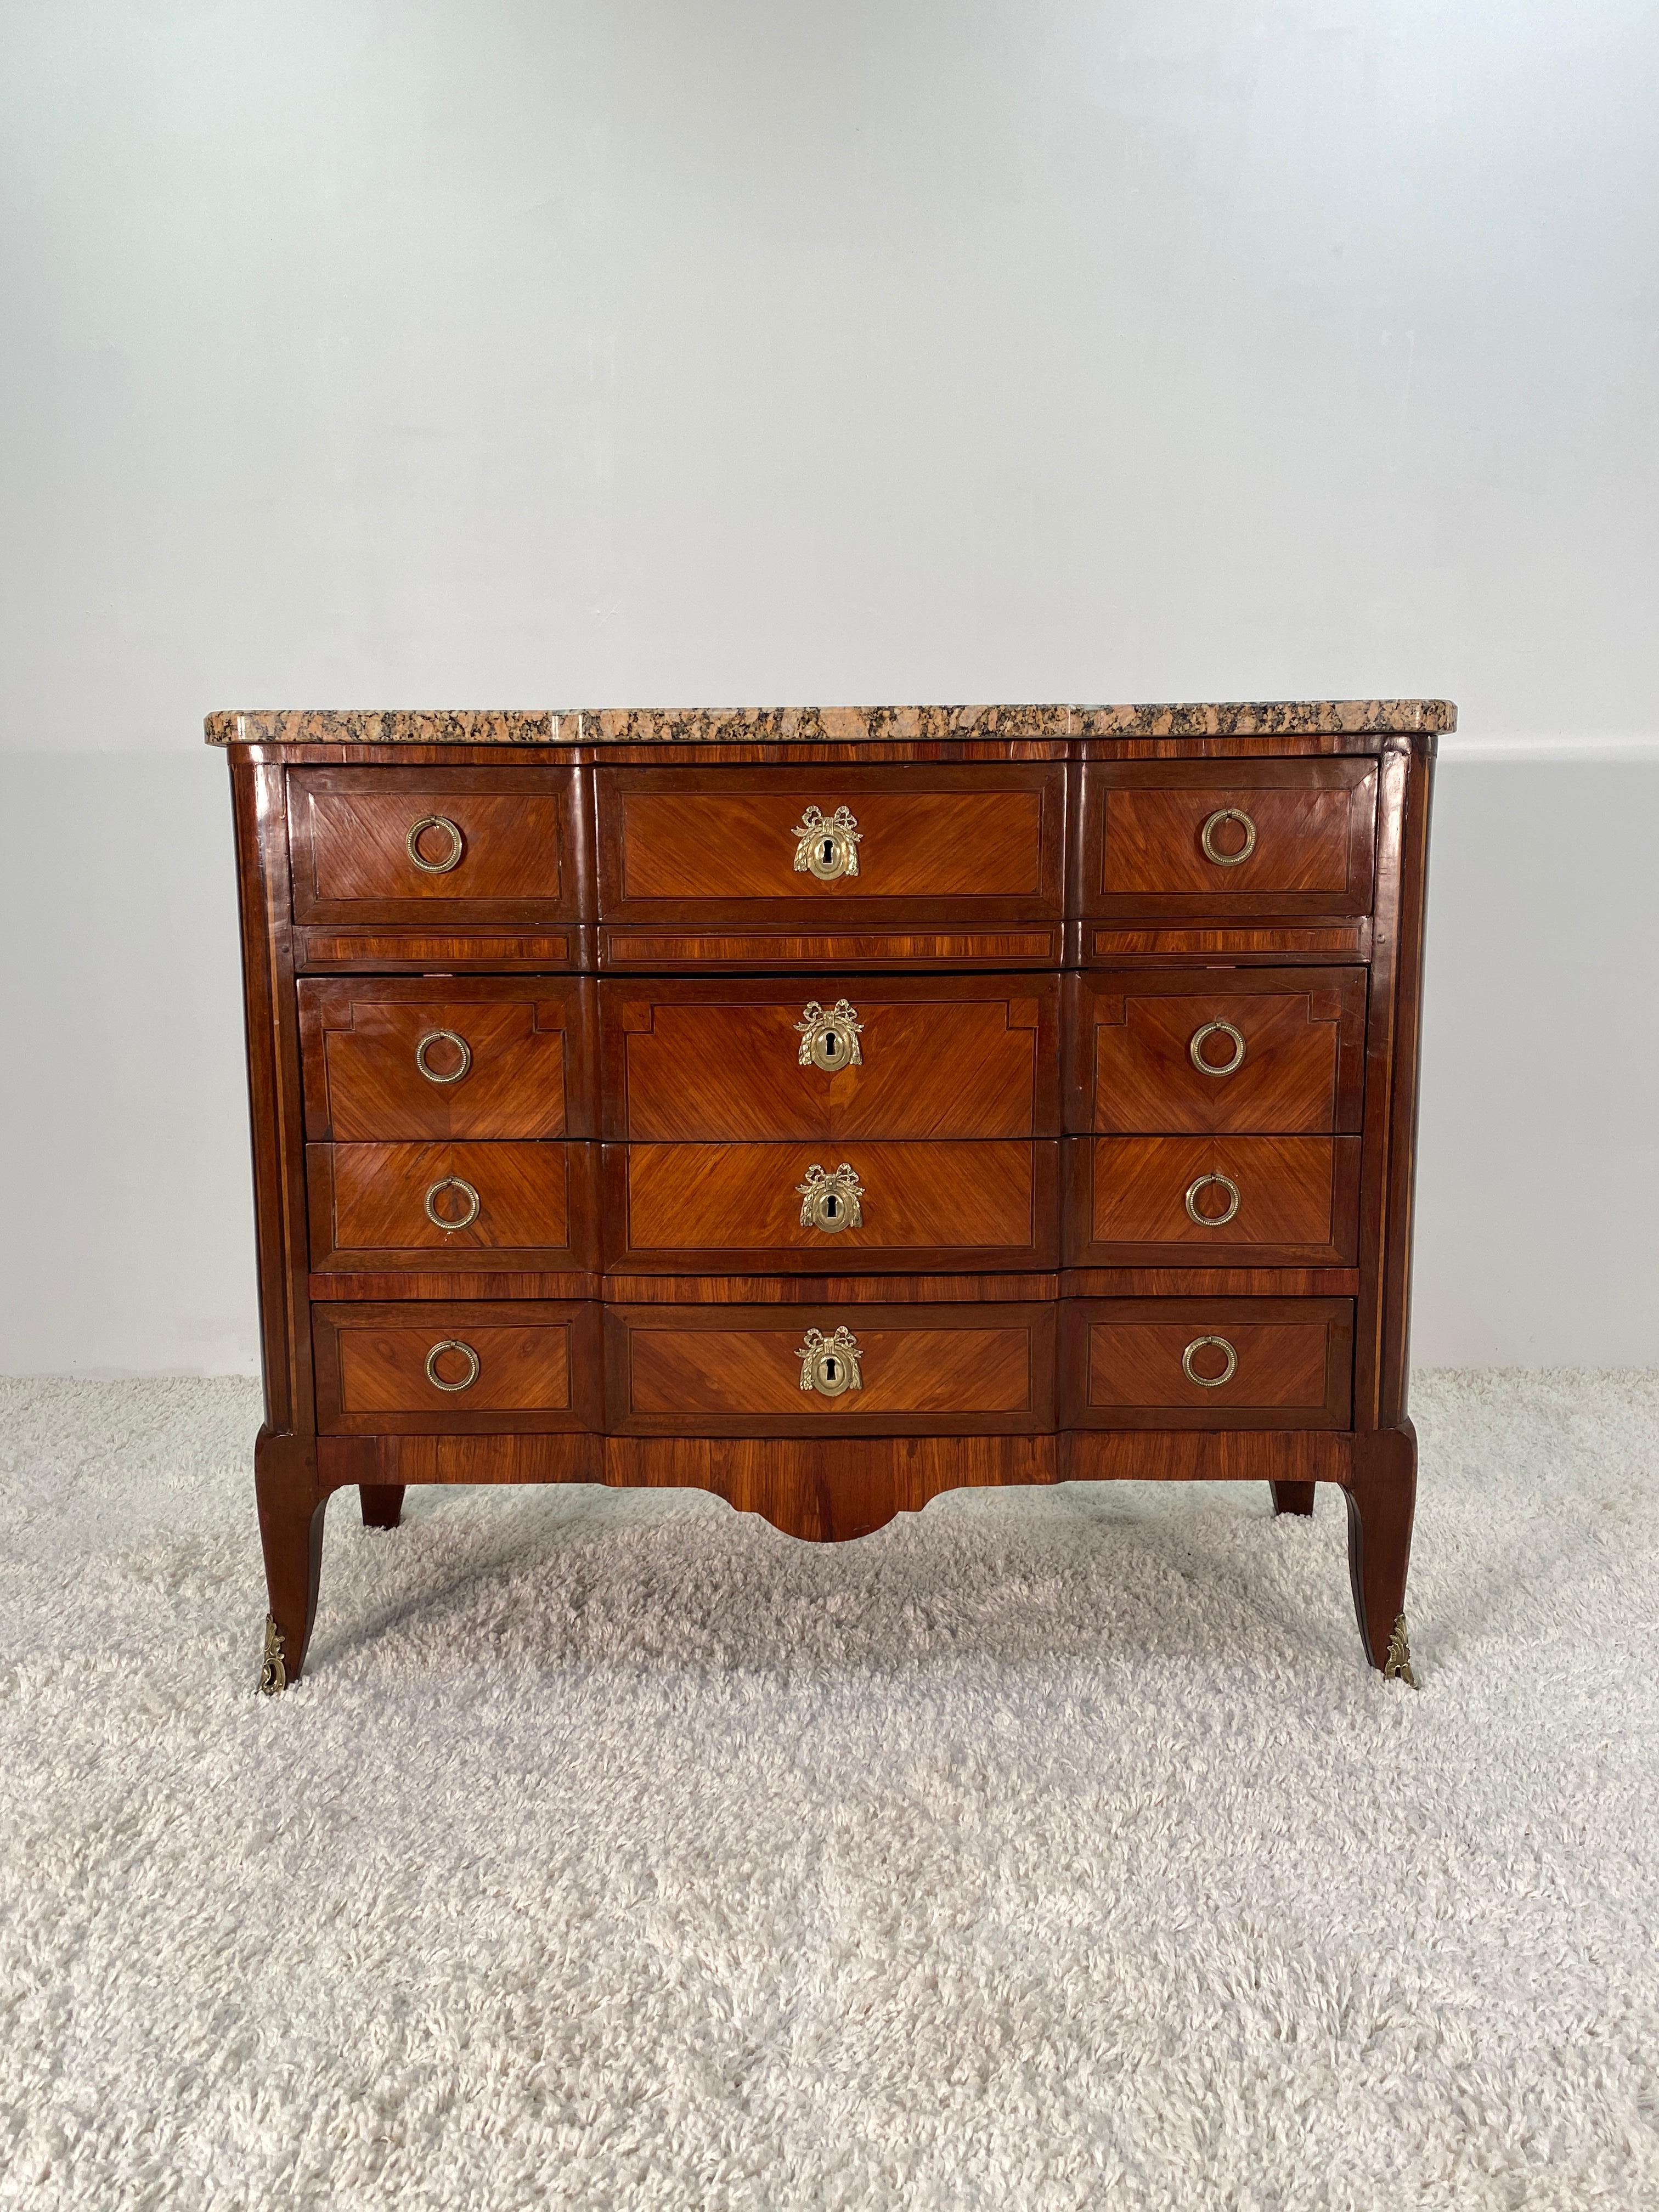 Louis XVI marble-top commode featuring Tulip wood, rose wood and King wood veneers throughout. Built using oak secondary woods. The highly polished granite marble top is in impeccable condition with no previous damage or repairs of any kind. The